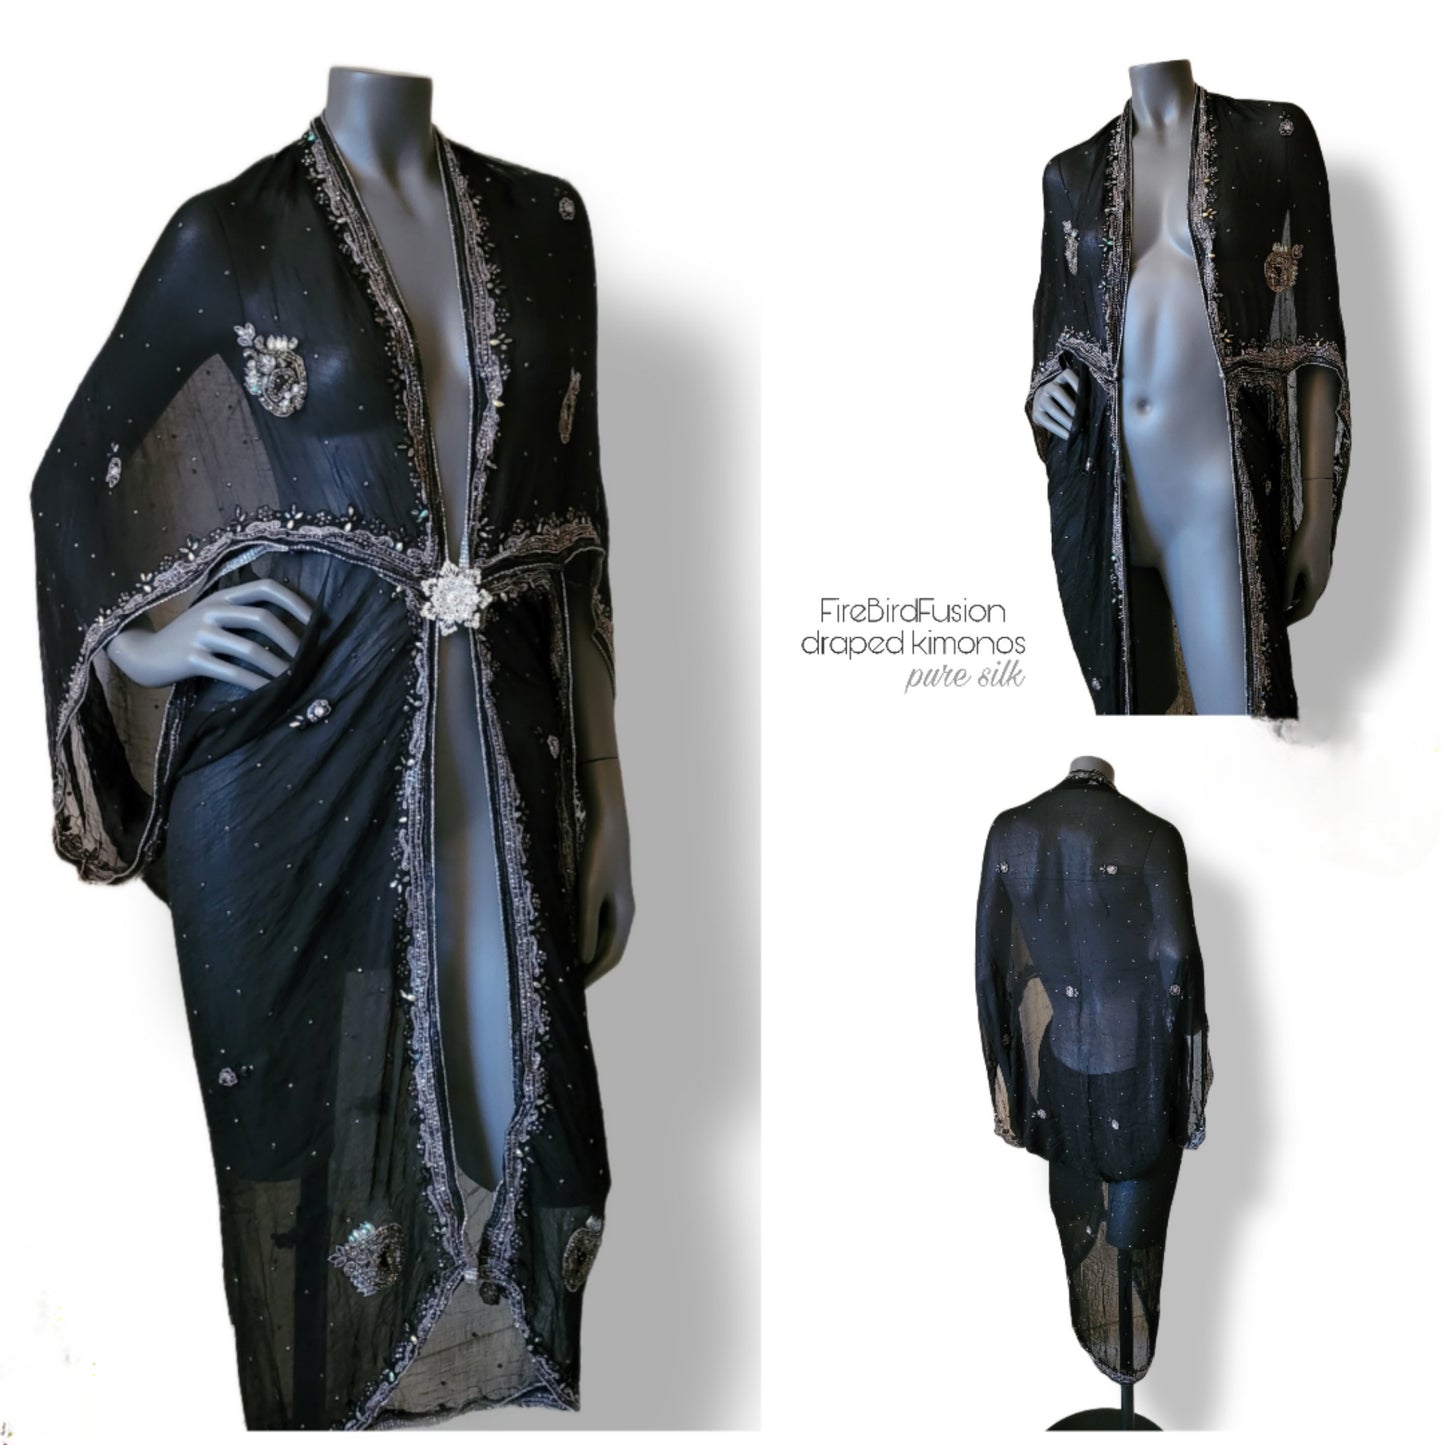 Luxurious draped pure silk kimono, black with beautiful hand embroidered pattern in silver and irredecent gray (L-XL) RESERVED